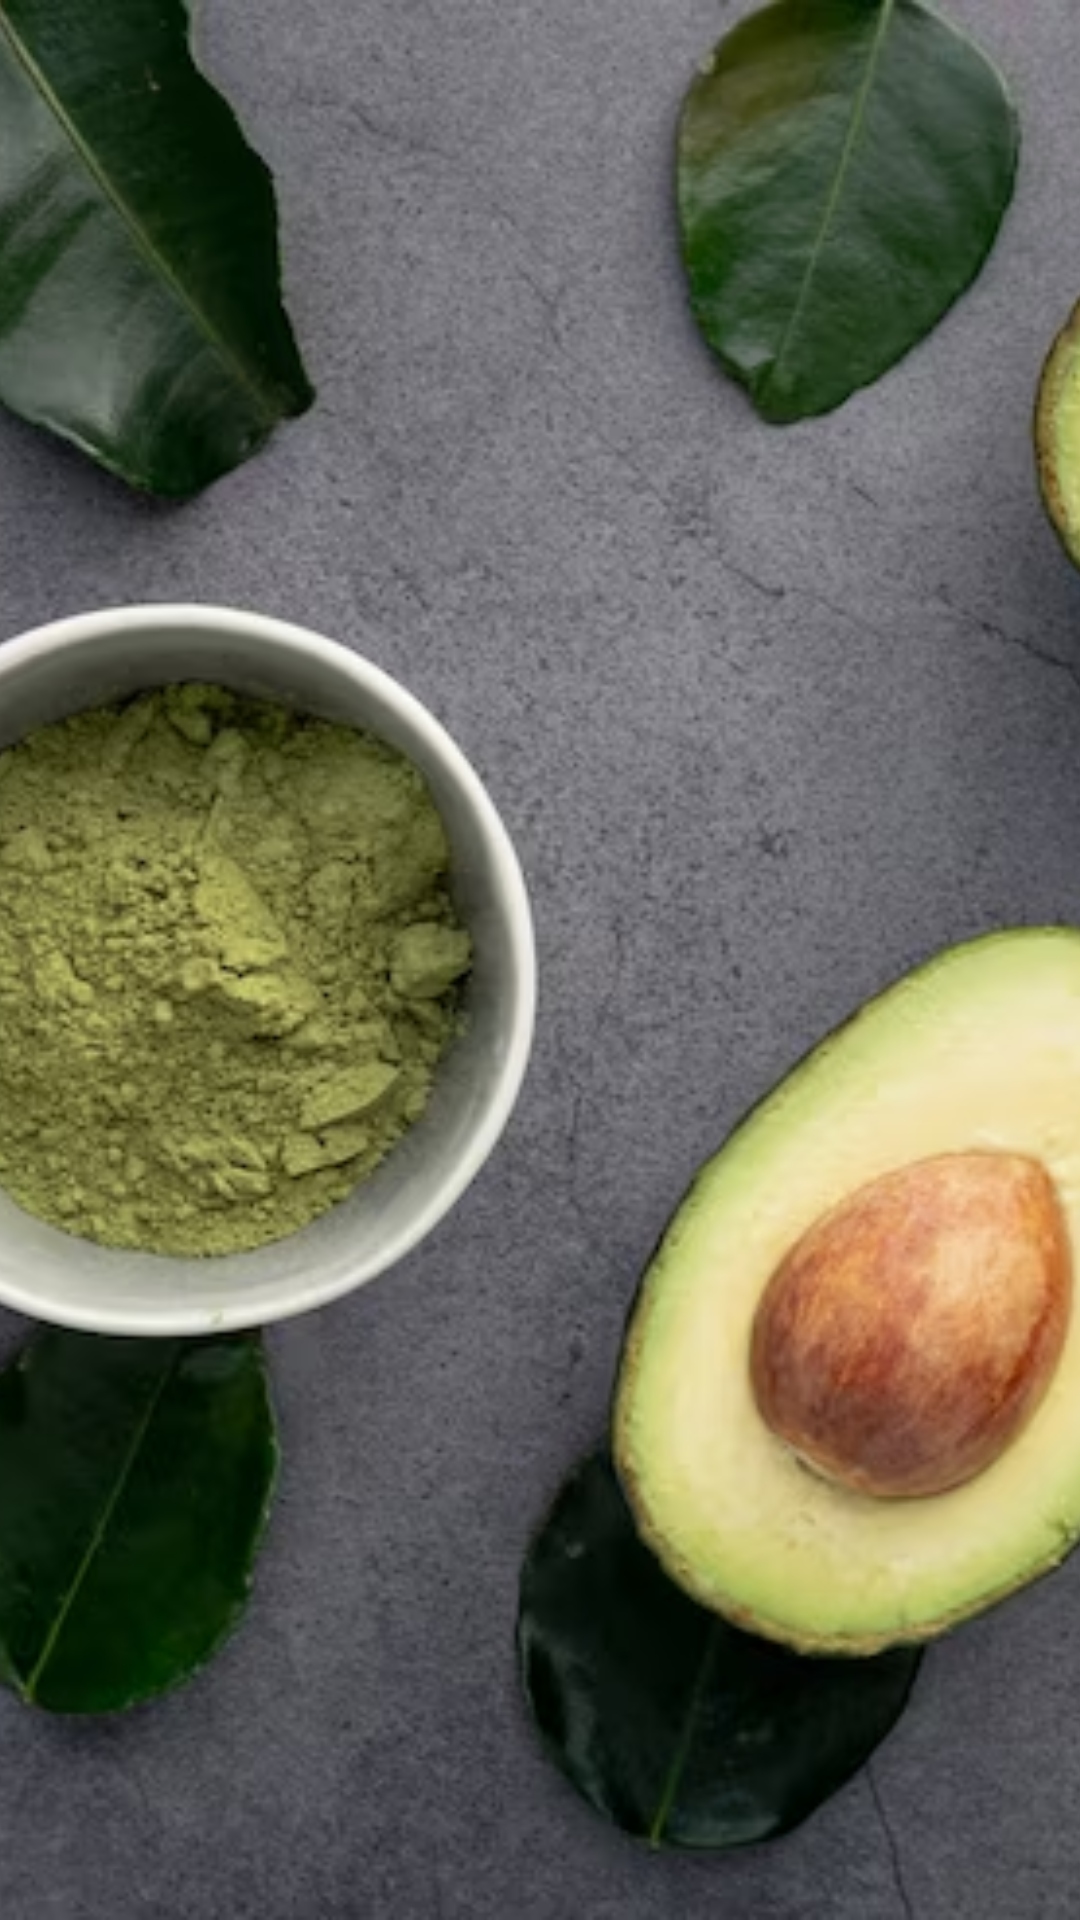 10 reasons why you should use avocados to improve your hair health 